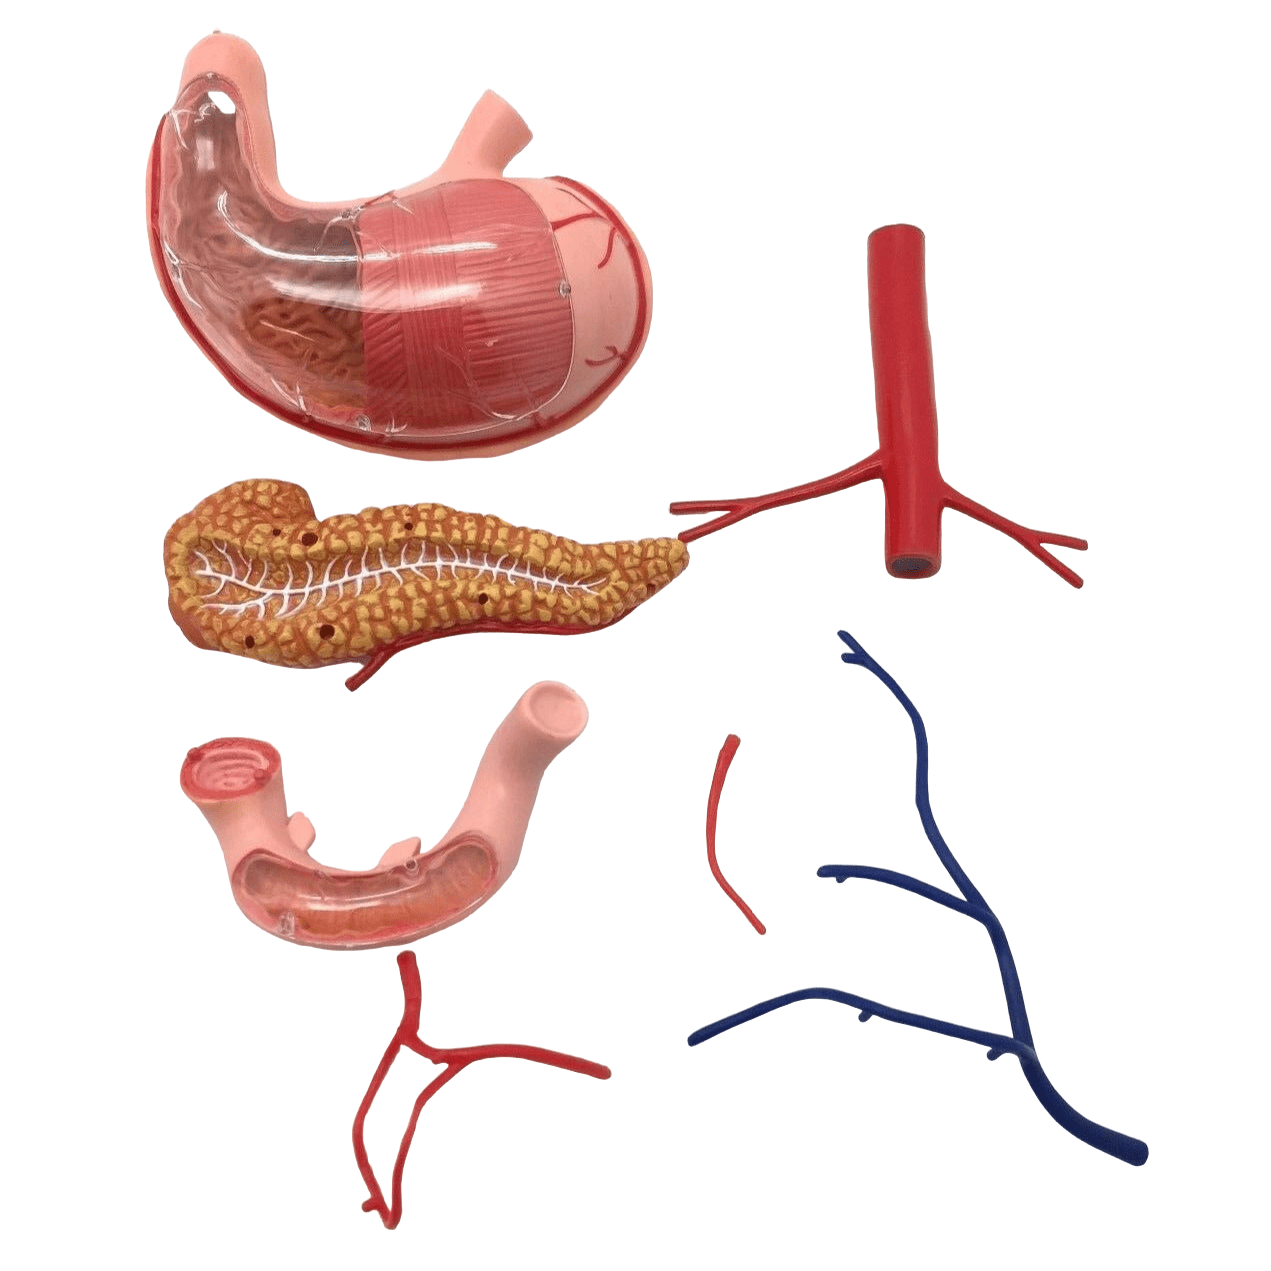 4D Medical model of the human stomach and other organs